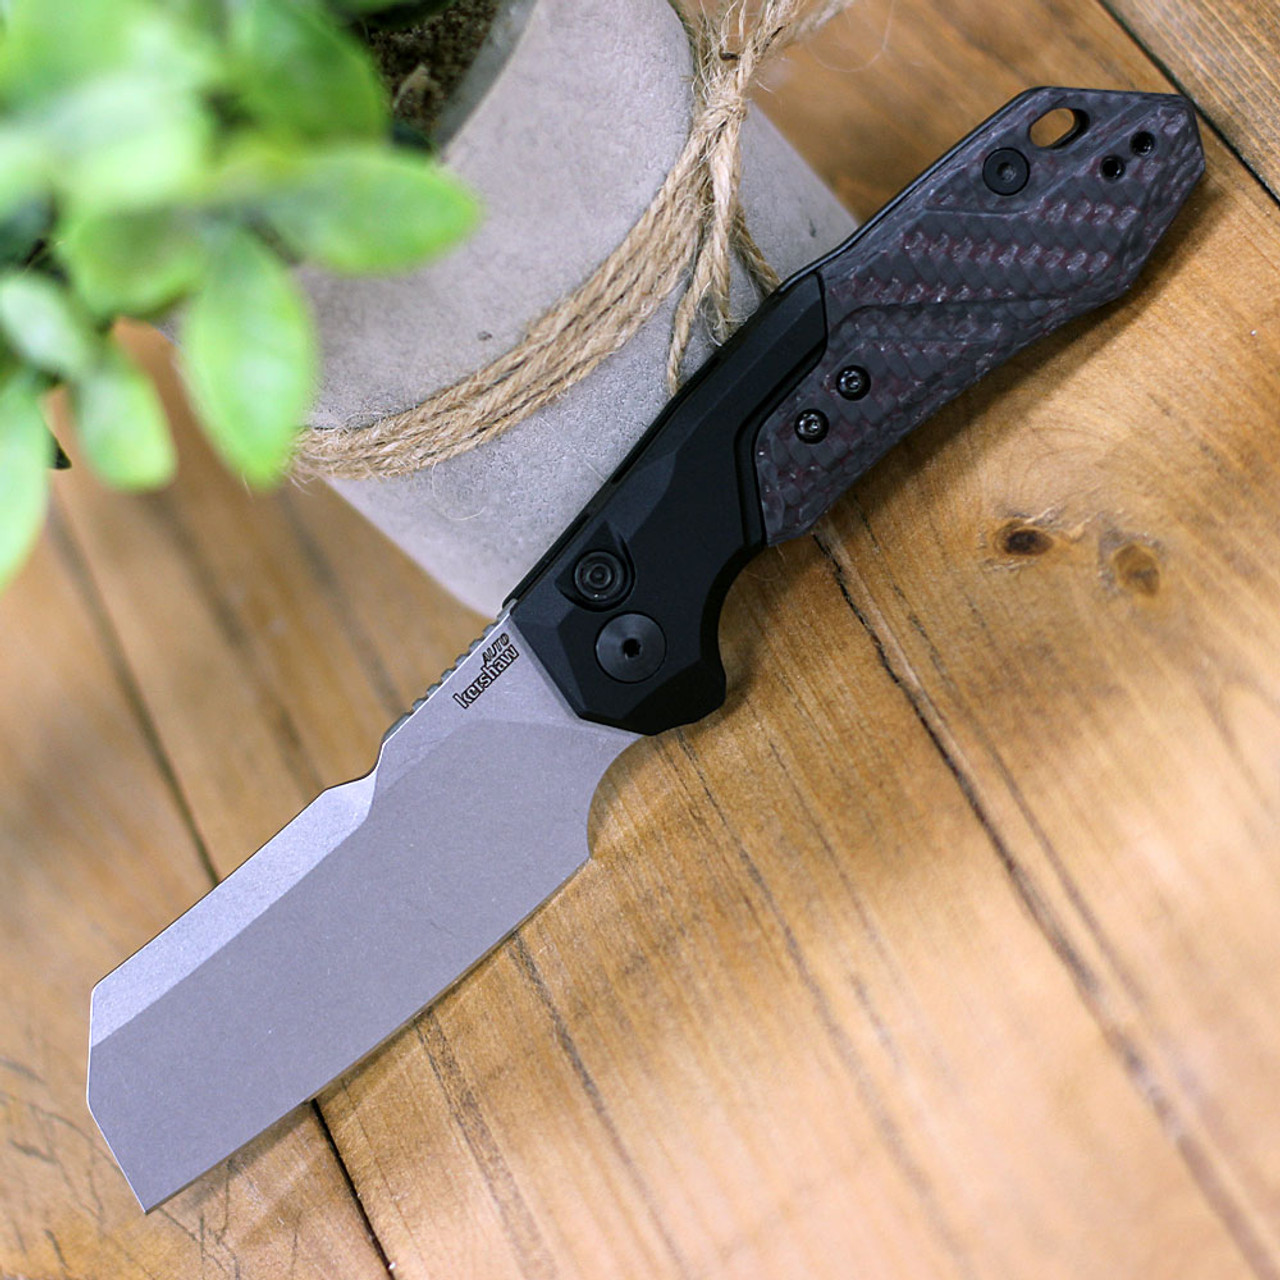 Kershaw Launch 14 Automatic Knife (KS7850RDSW) 3.375" CPM-154 Cleaver Blade, Black and Red Aluminum w/ Carbon Fiber Inlay Handle